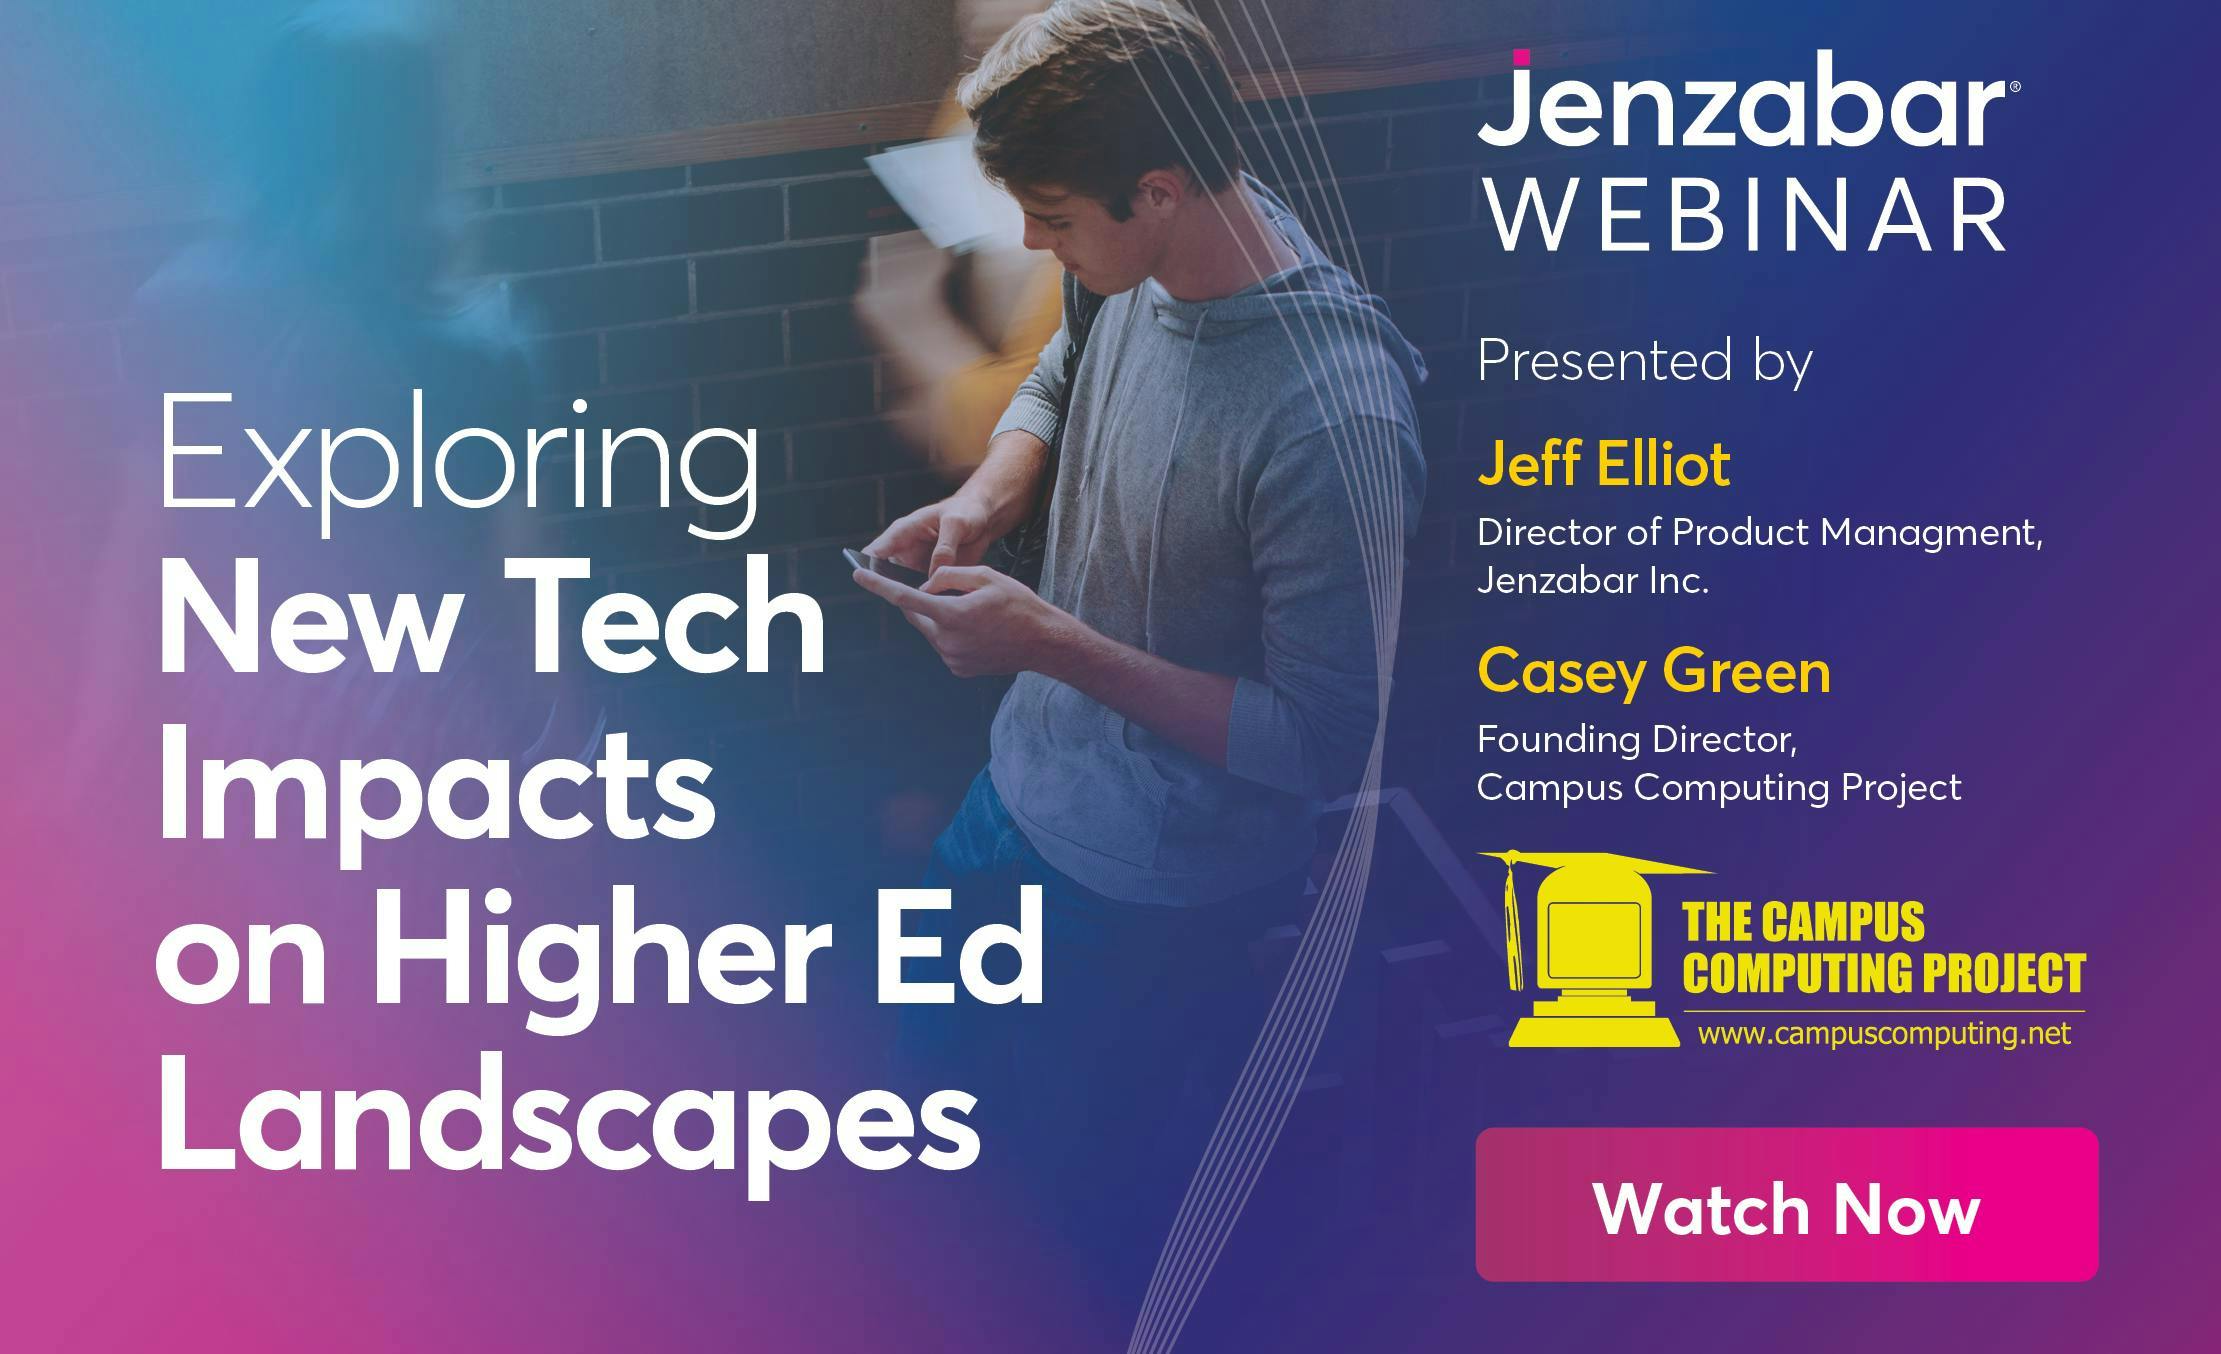 Webinar: Exploring New Tech Impacts on Higher Education Landscapes